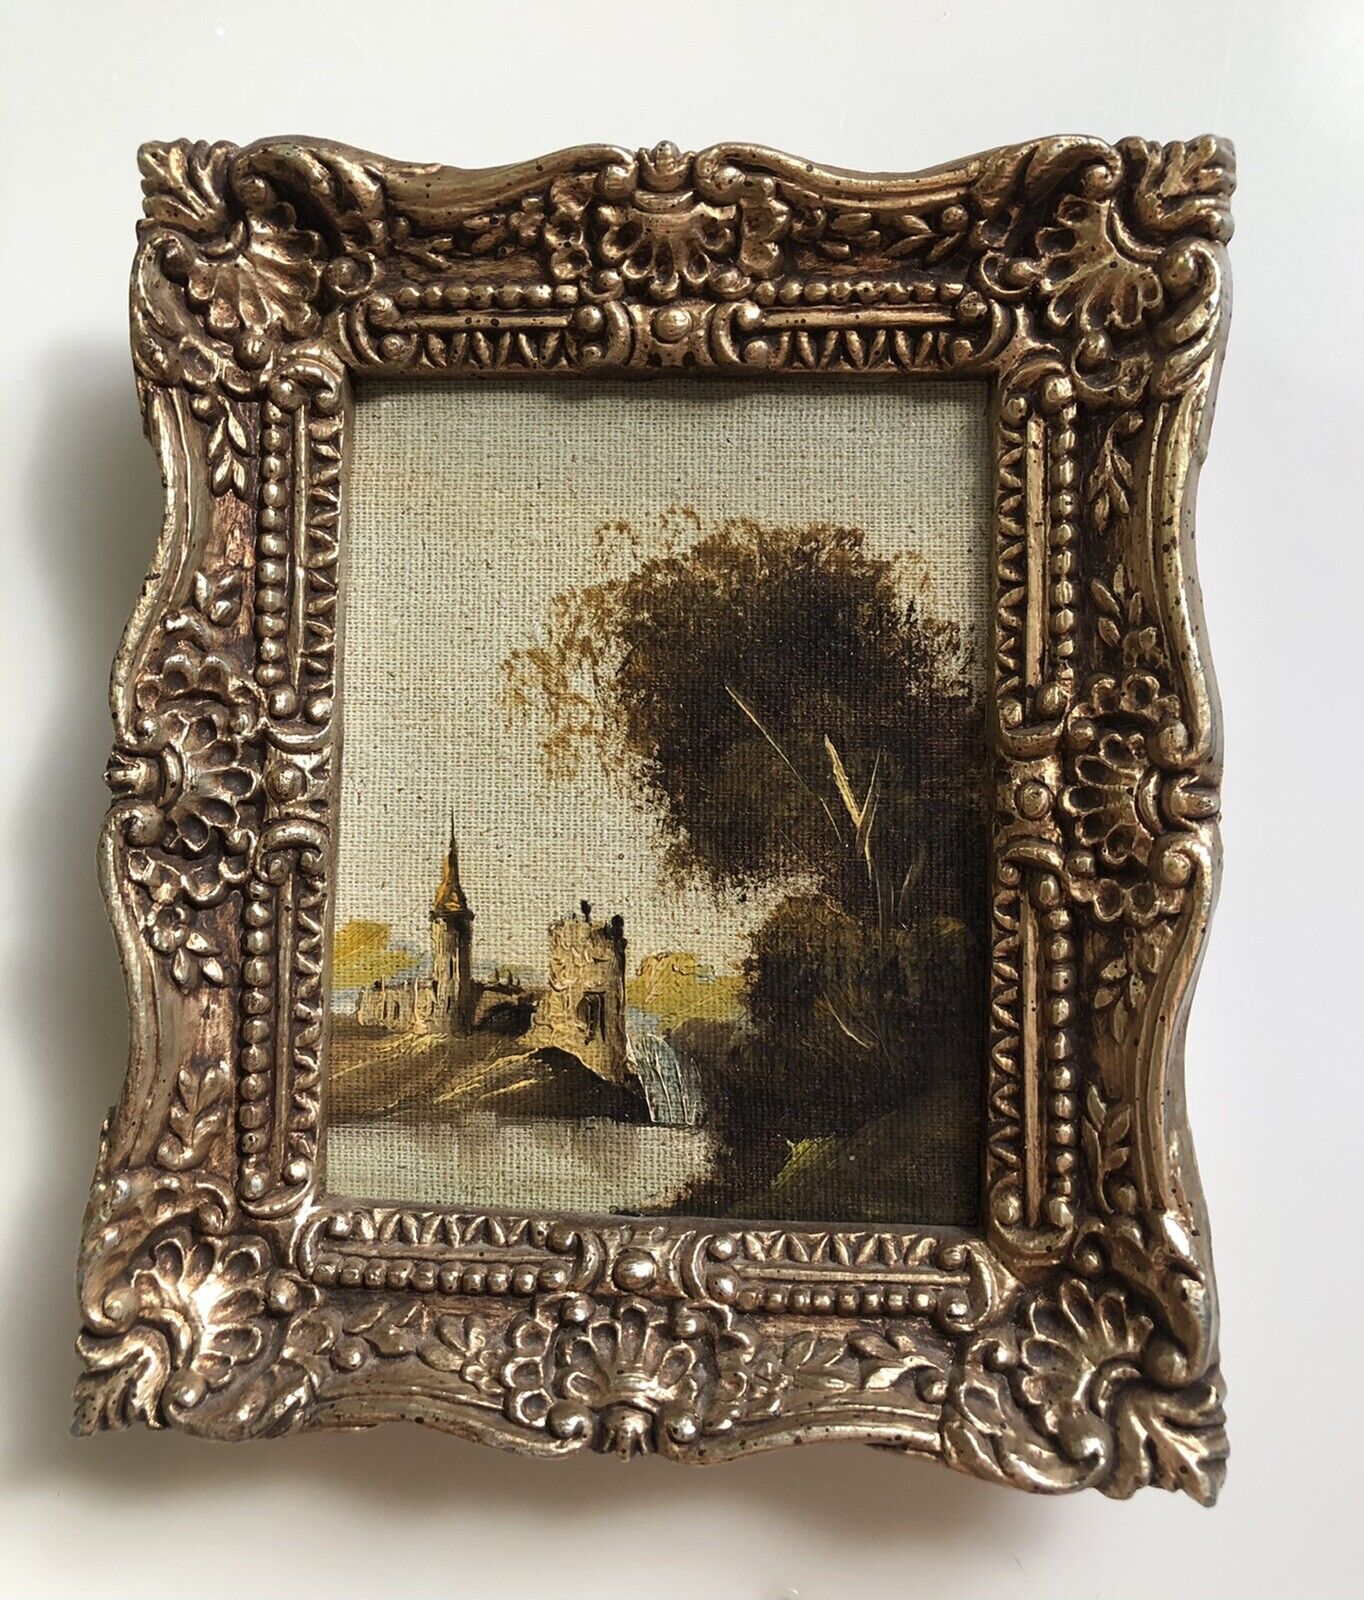 3 Paintings Artist Unknown Small Landscape Oil Paintings Burwood Products Frames Без бренда - фотография #3